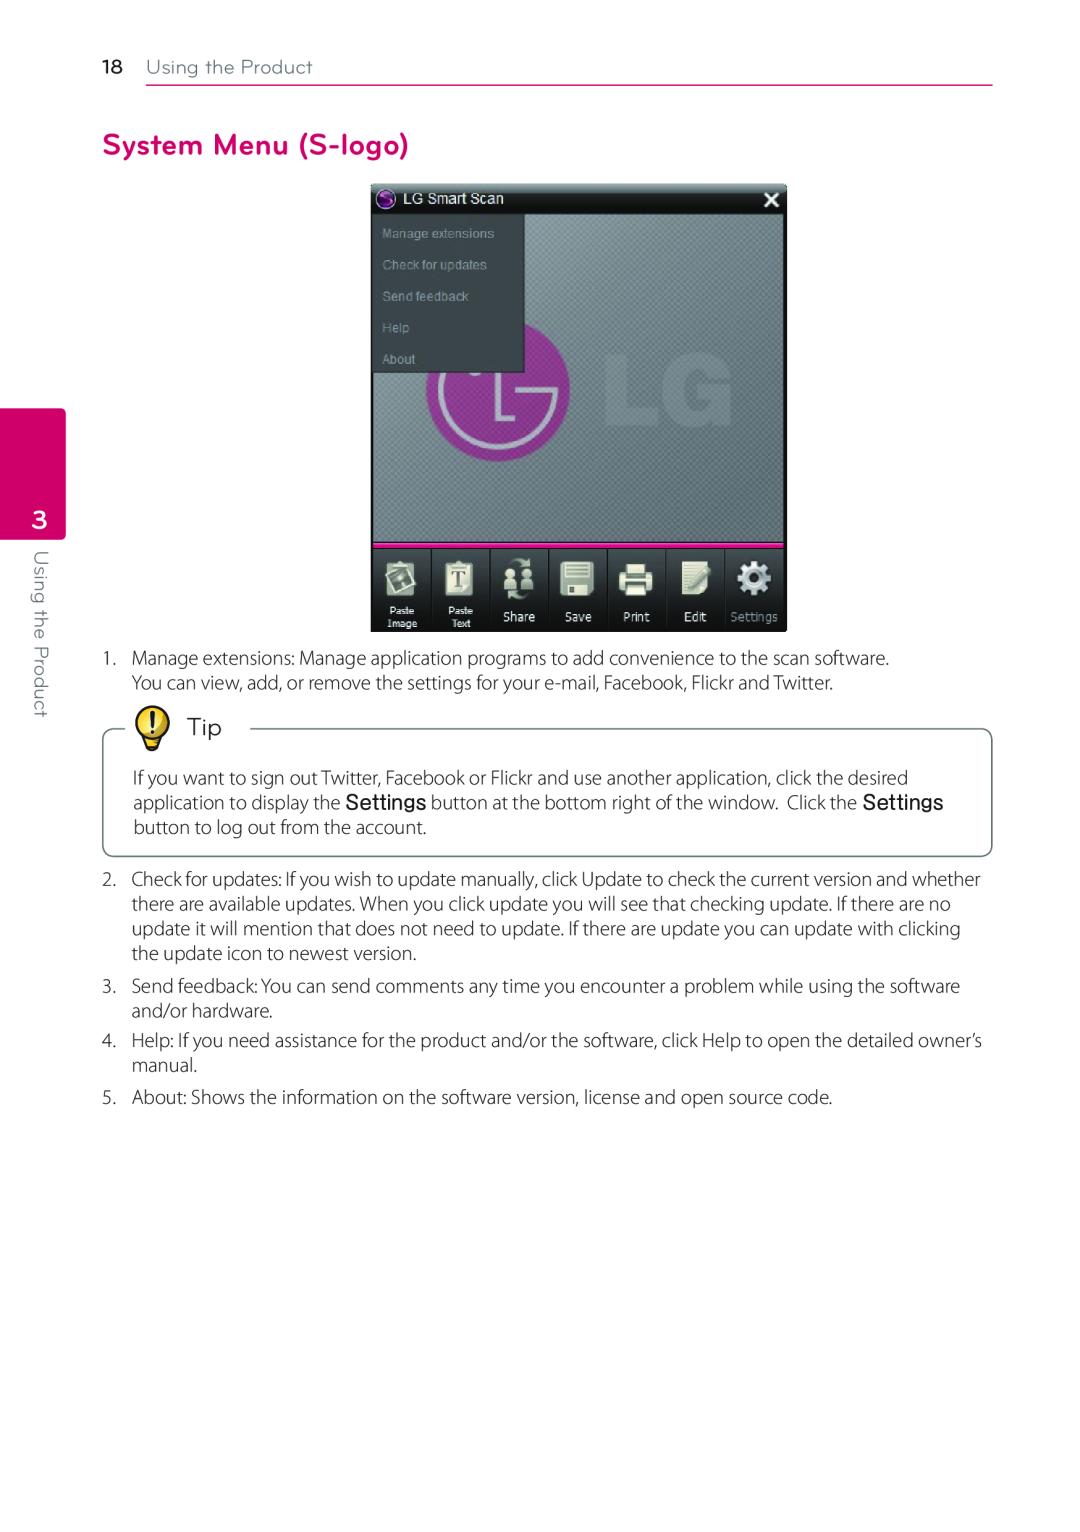 LG Electronics LSM-100 owner manual System Menu S-logo, Using the Product 